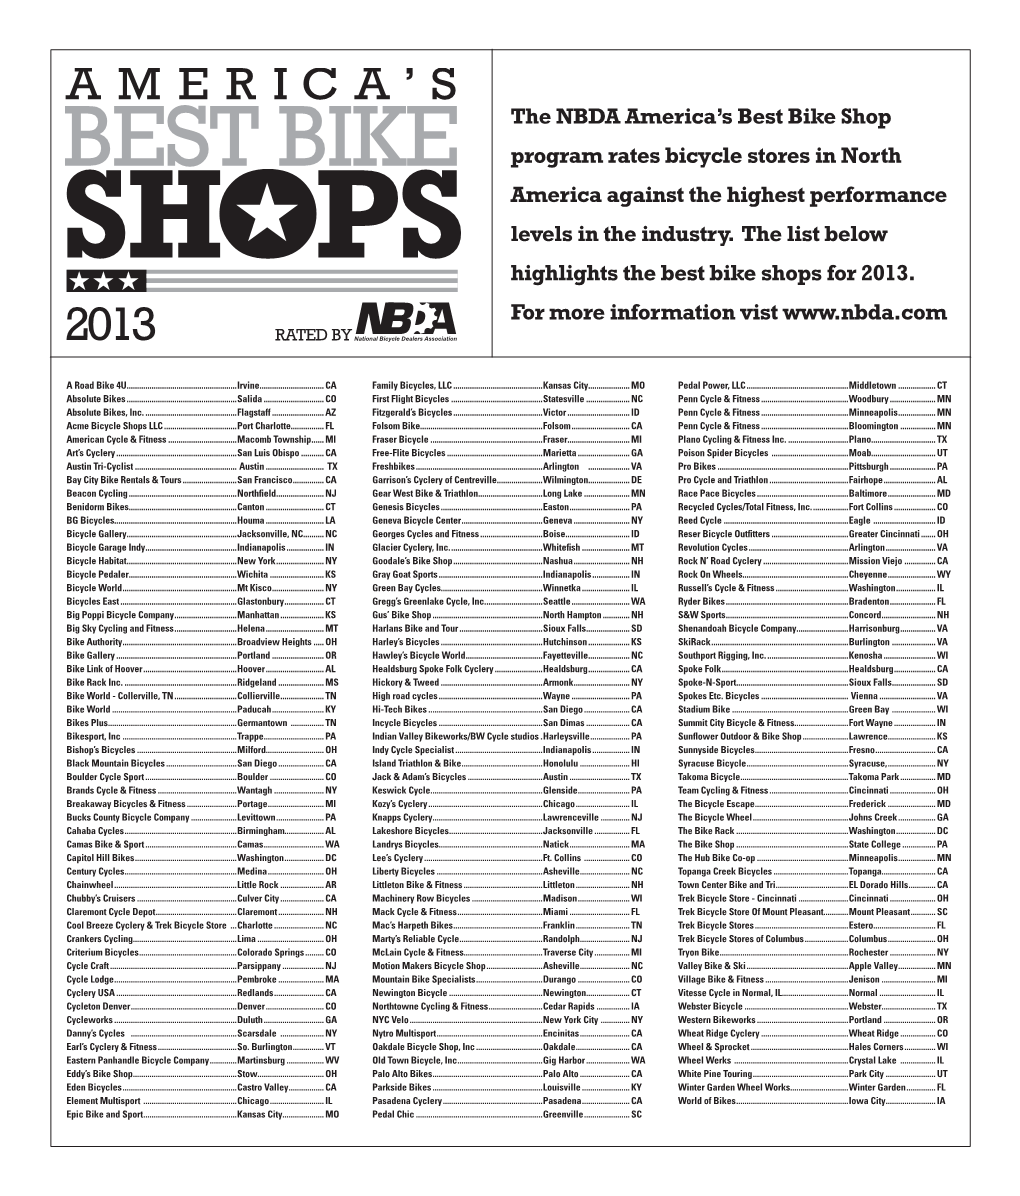 The NBDA America's Best Bike Shop Program Rates Bicycle Stores In